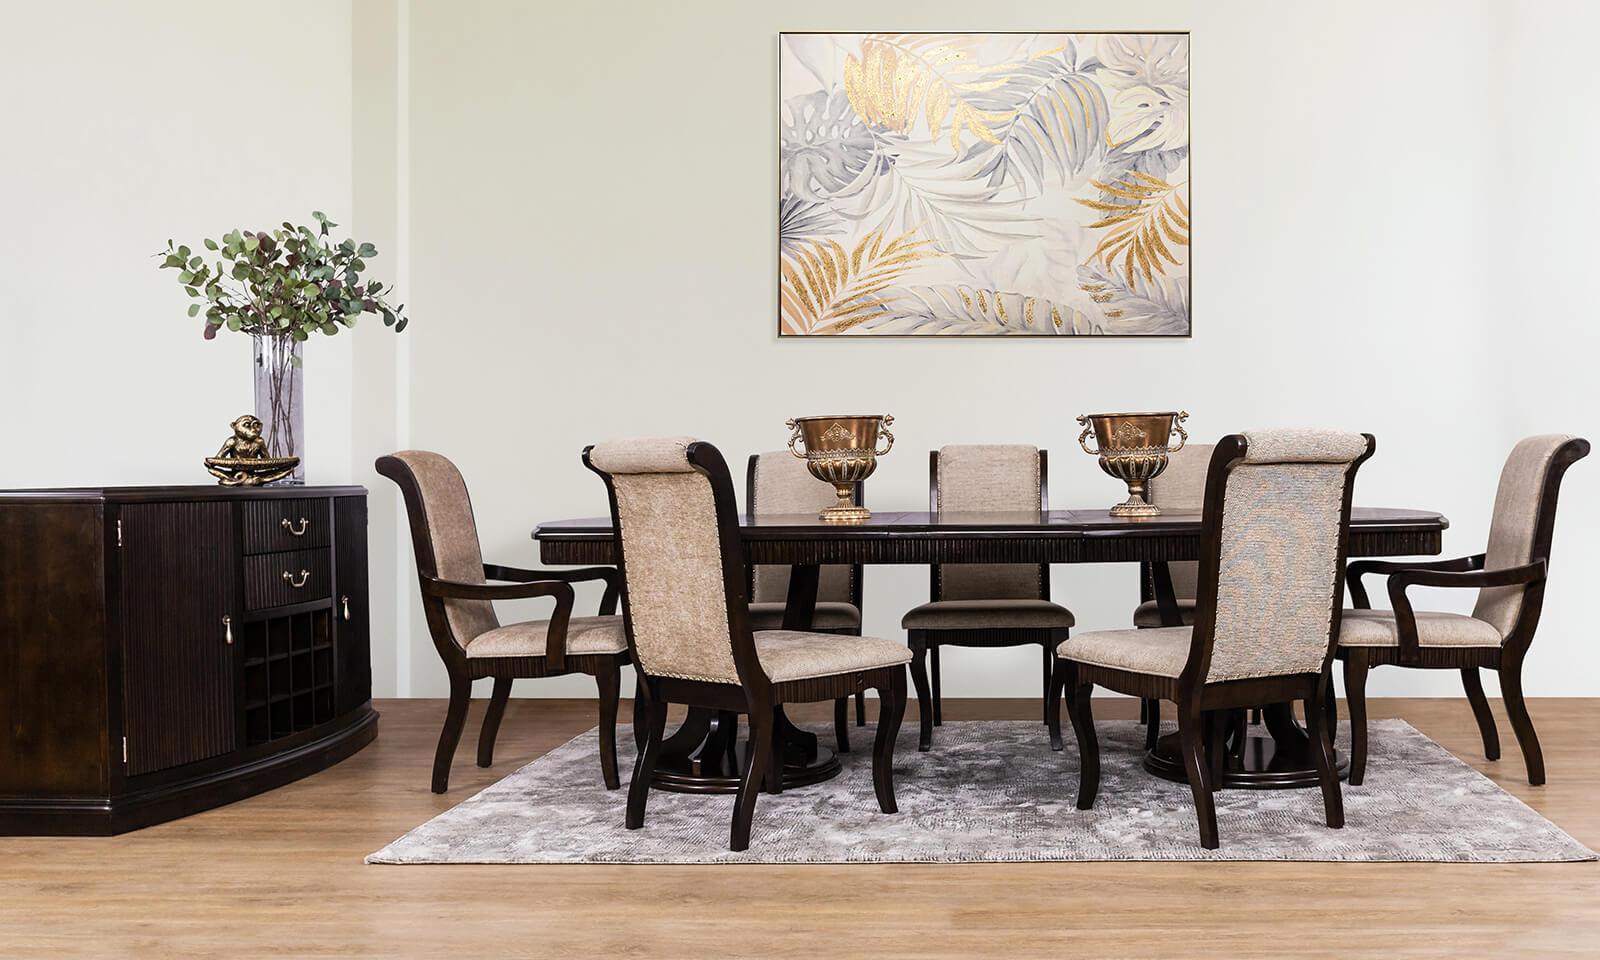 3 DINING ROOM SETS THAT WILL TRANSFORM YOUR DINING ROOM IN 2021